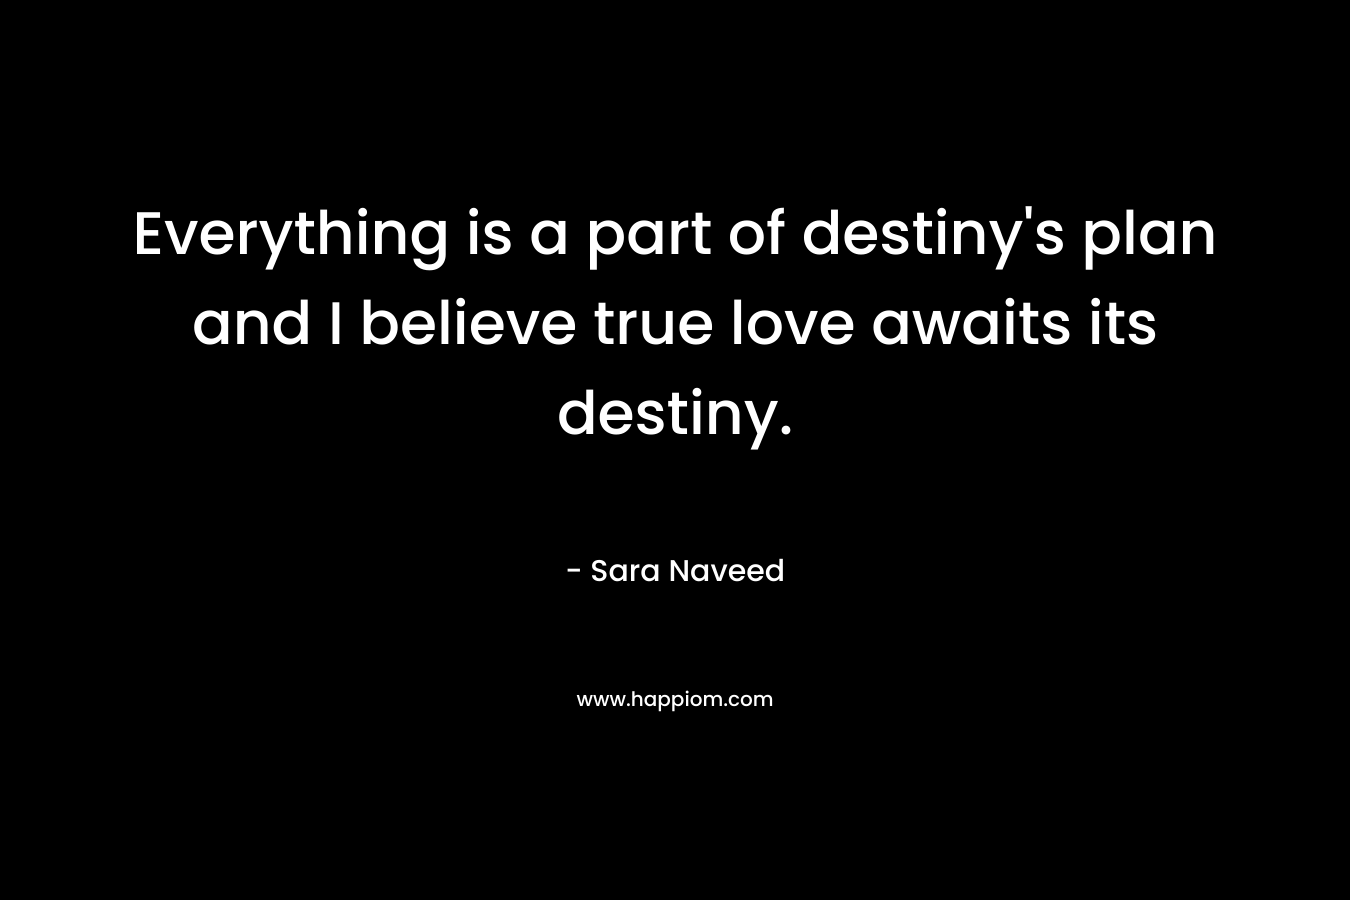 Everything is a part of destiny's plan and I believe true love awaits its destiny.